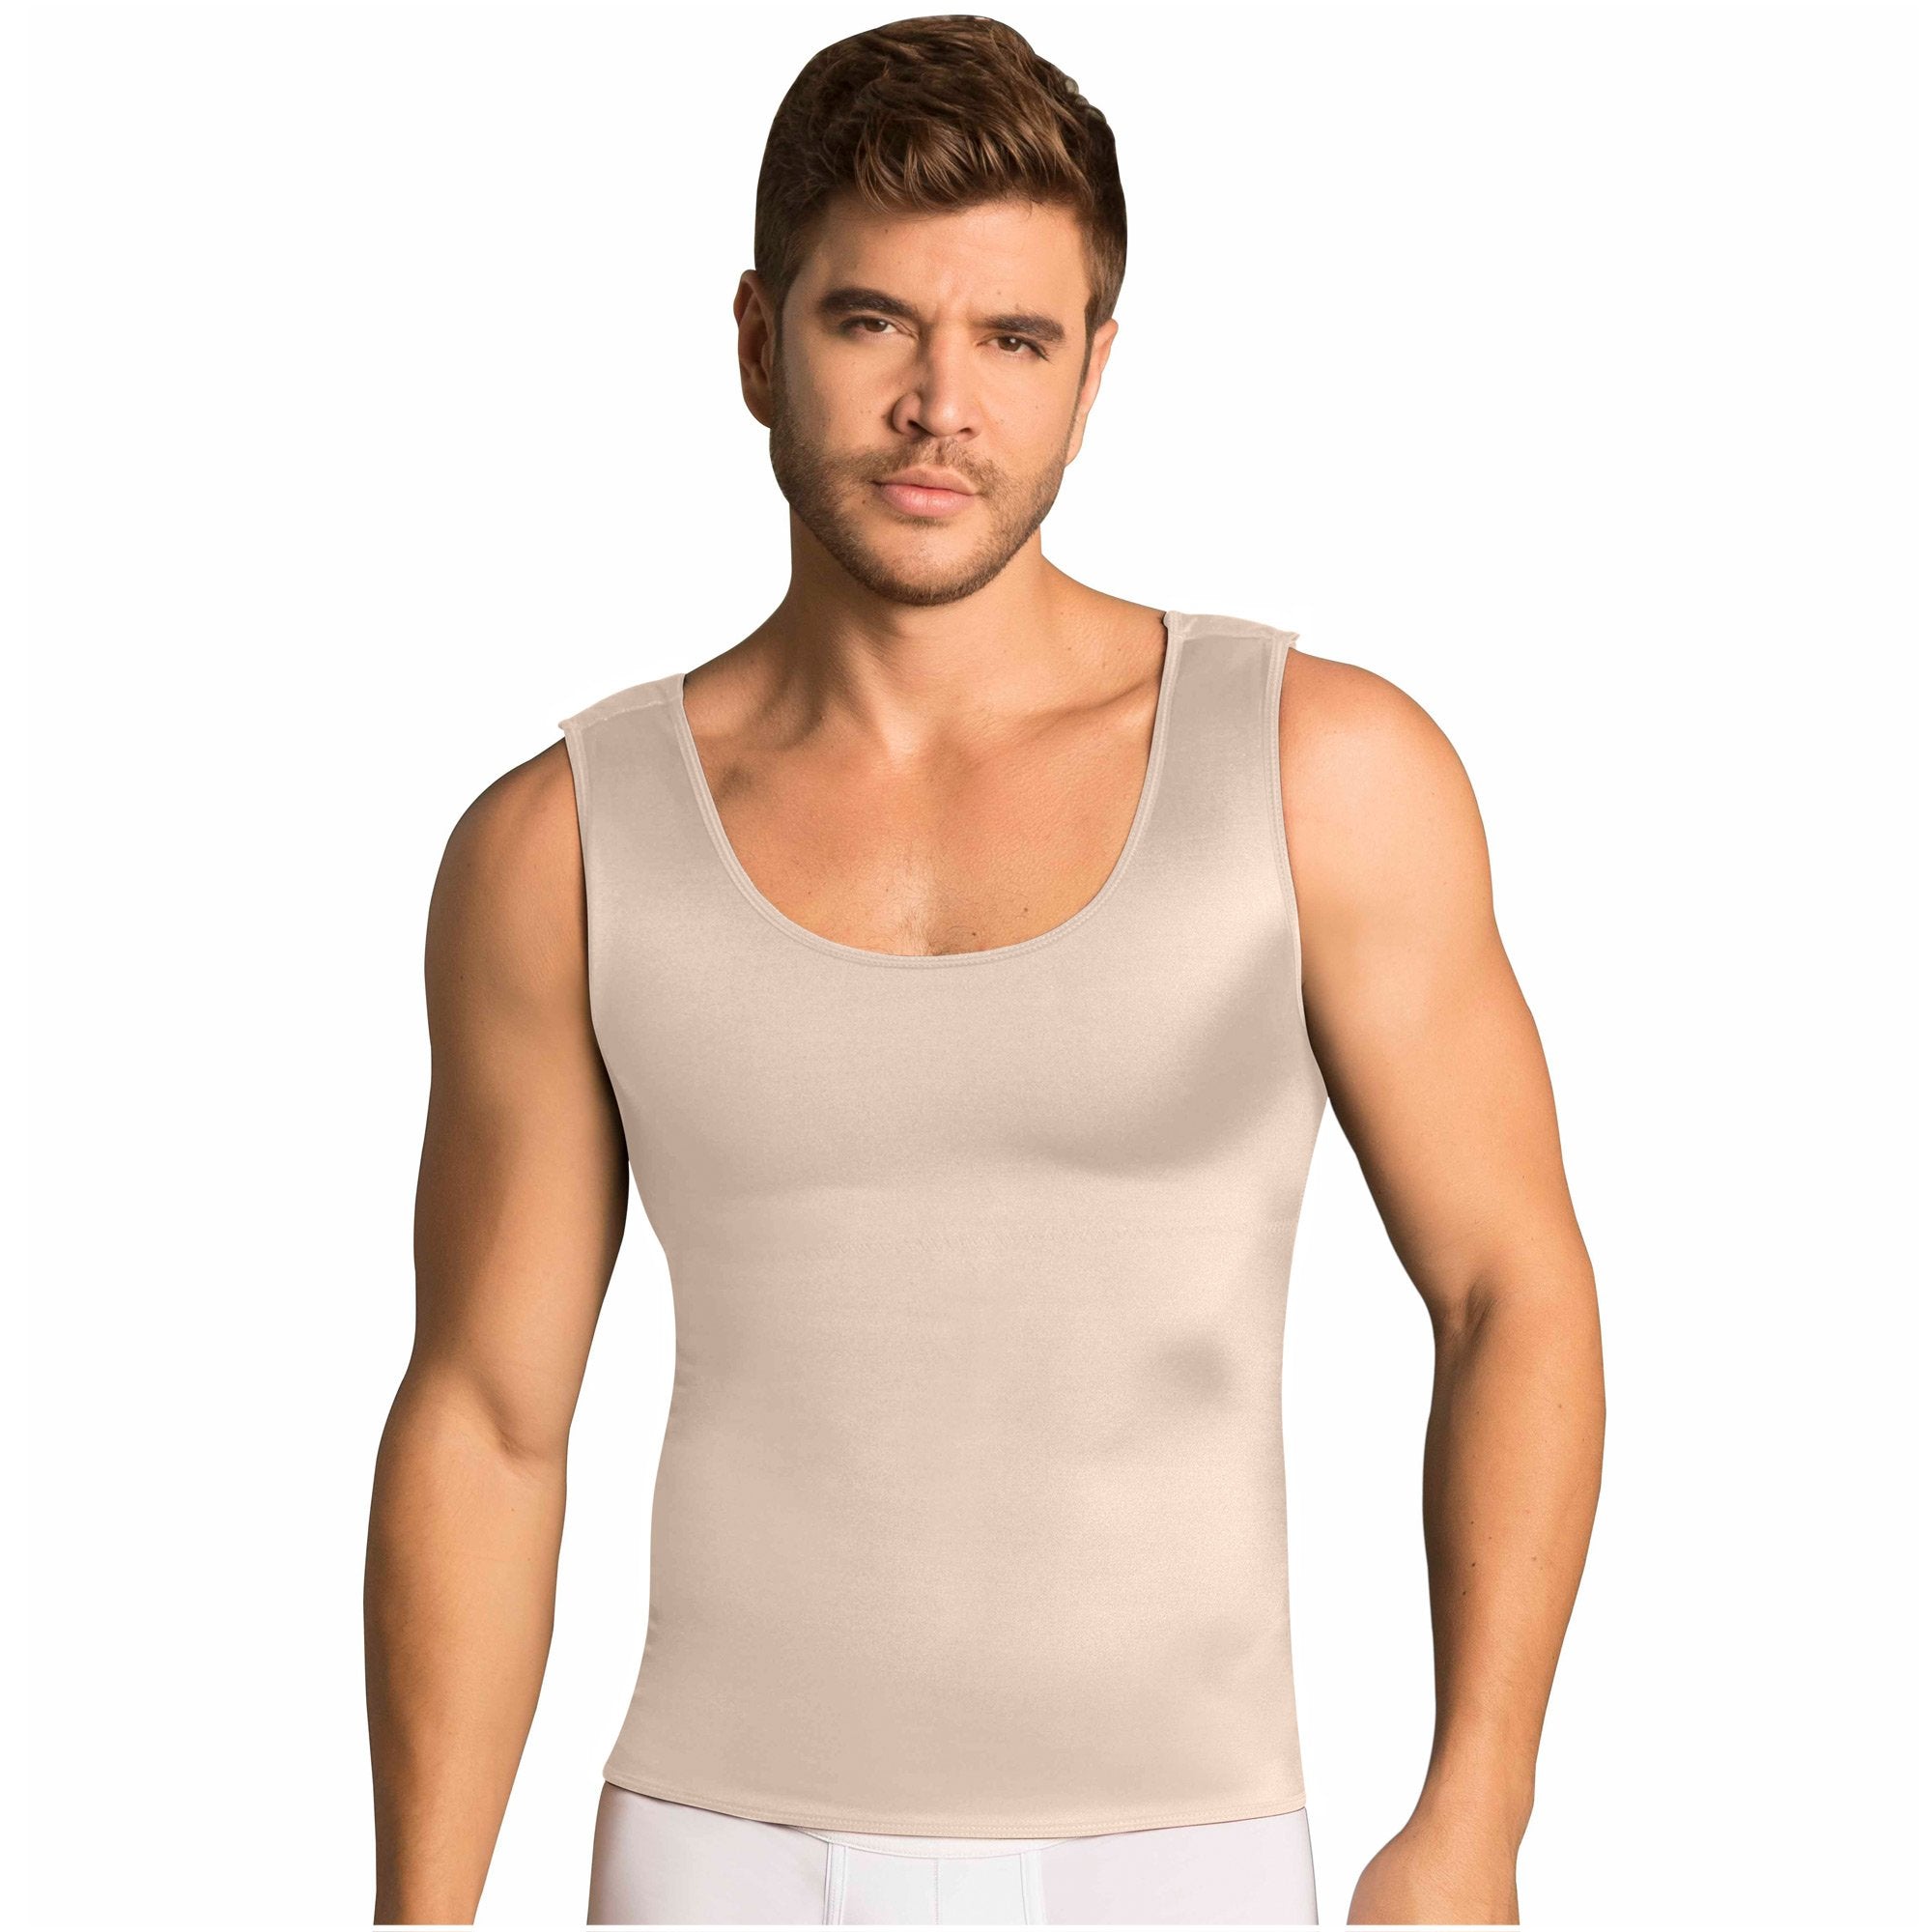 Daily Use Colombian Shapewear Tank Top for Men Fajas MariaE FH101 – Fajas  MariaE US